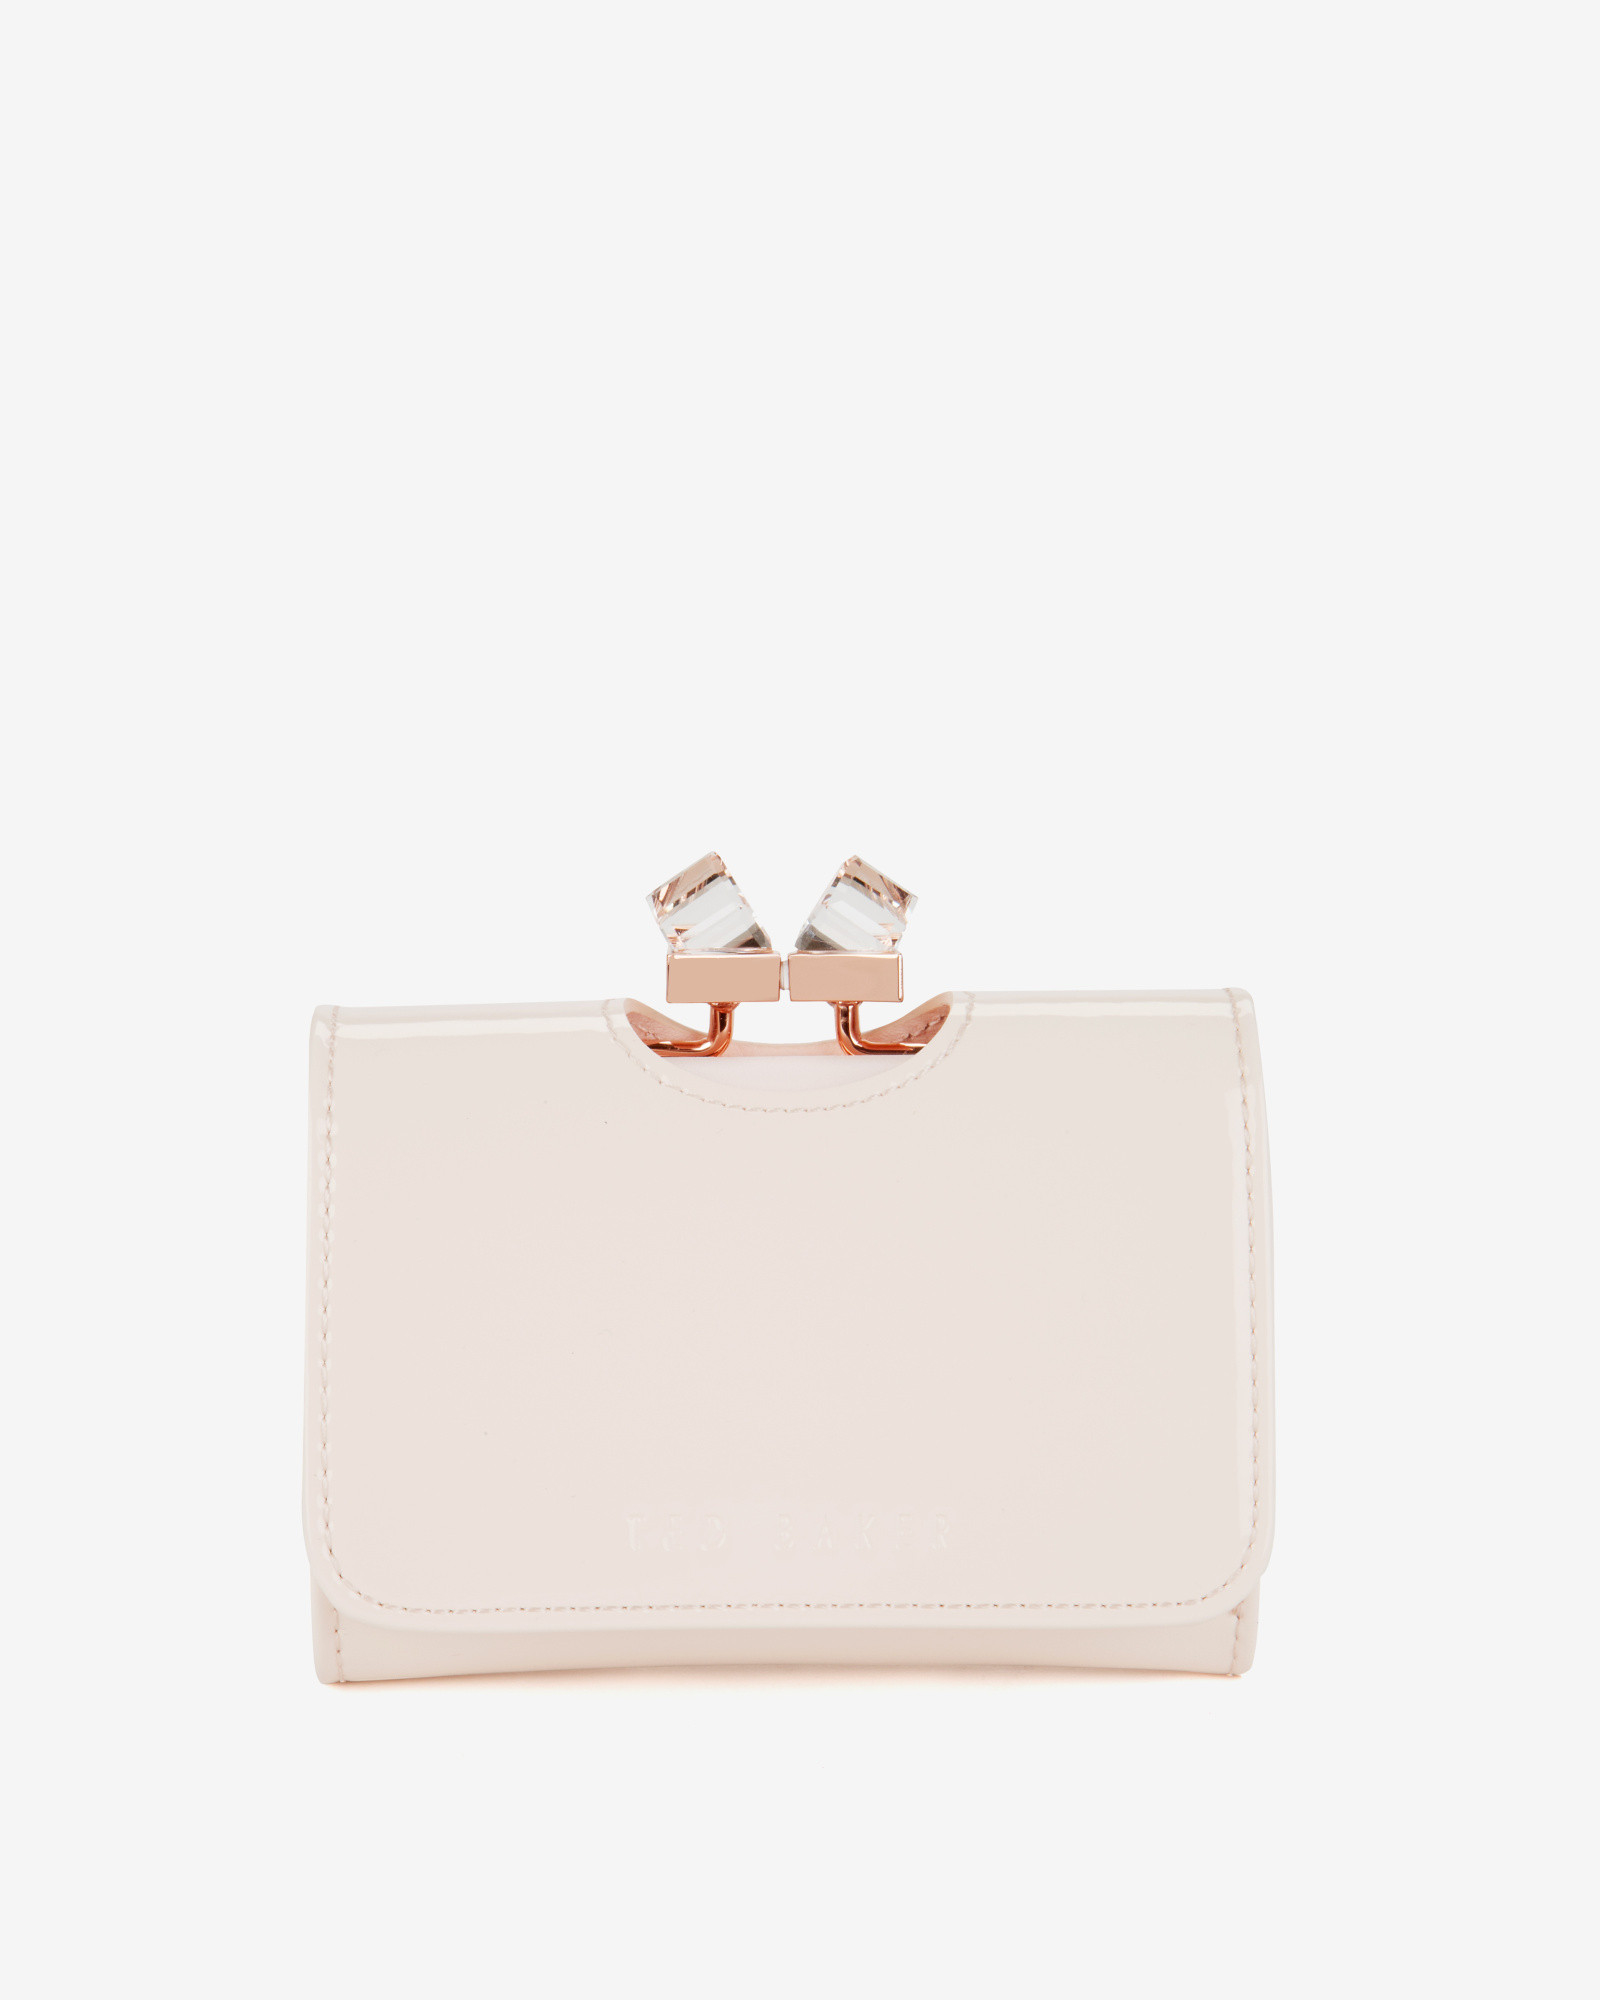 Ted Baker Small Patent Crystal Frame Purse in Nude Pink (Pink) - Lyst